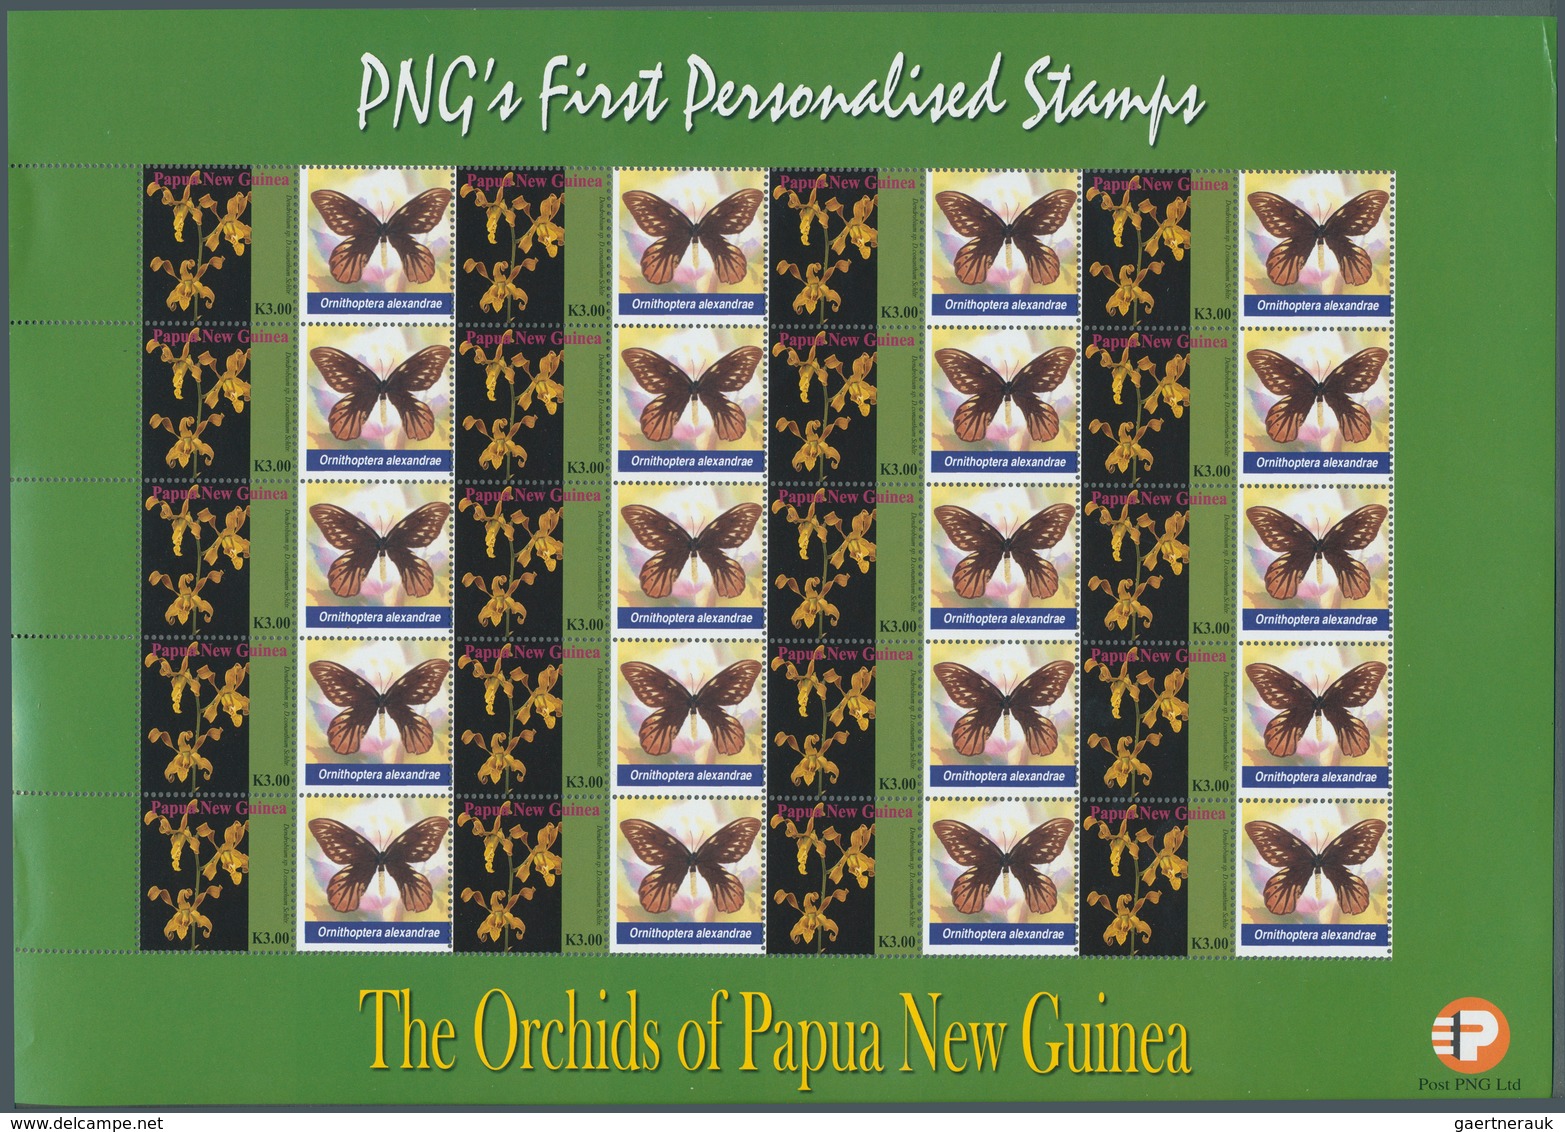 Papua Neuguinea: 2007, so called PERSONALIZED STAMPS over 5,000 sheets mint never hinged, attractive